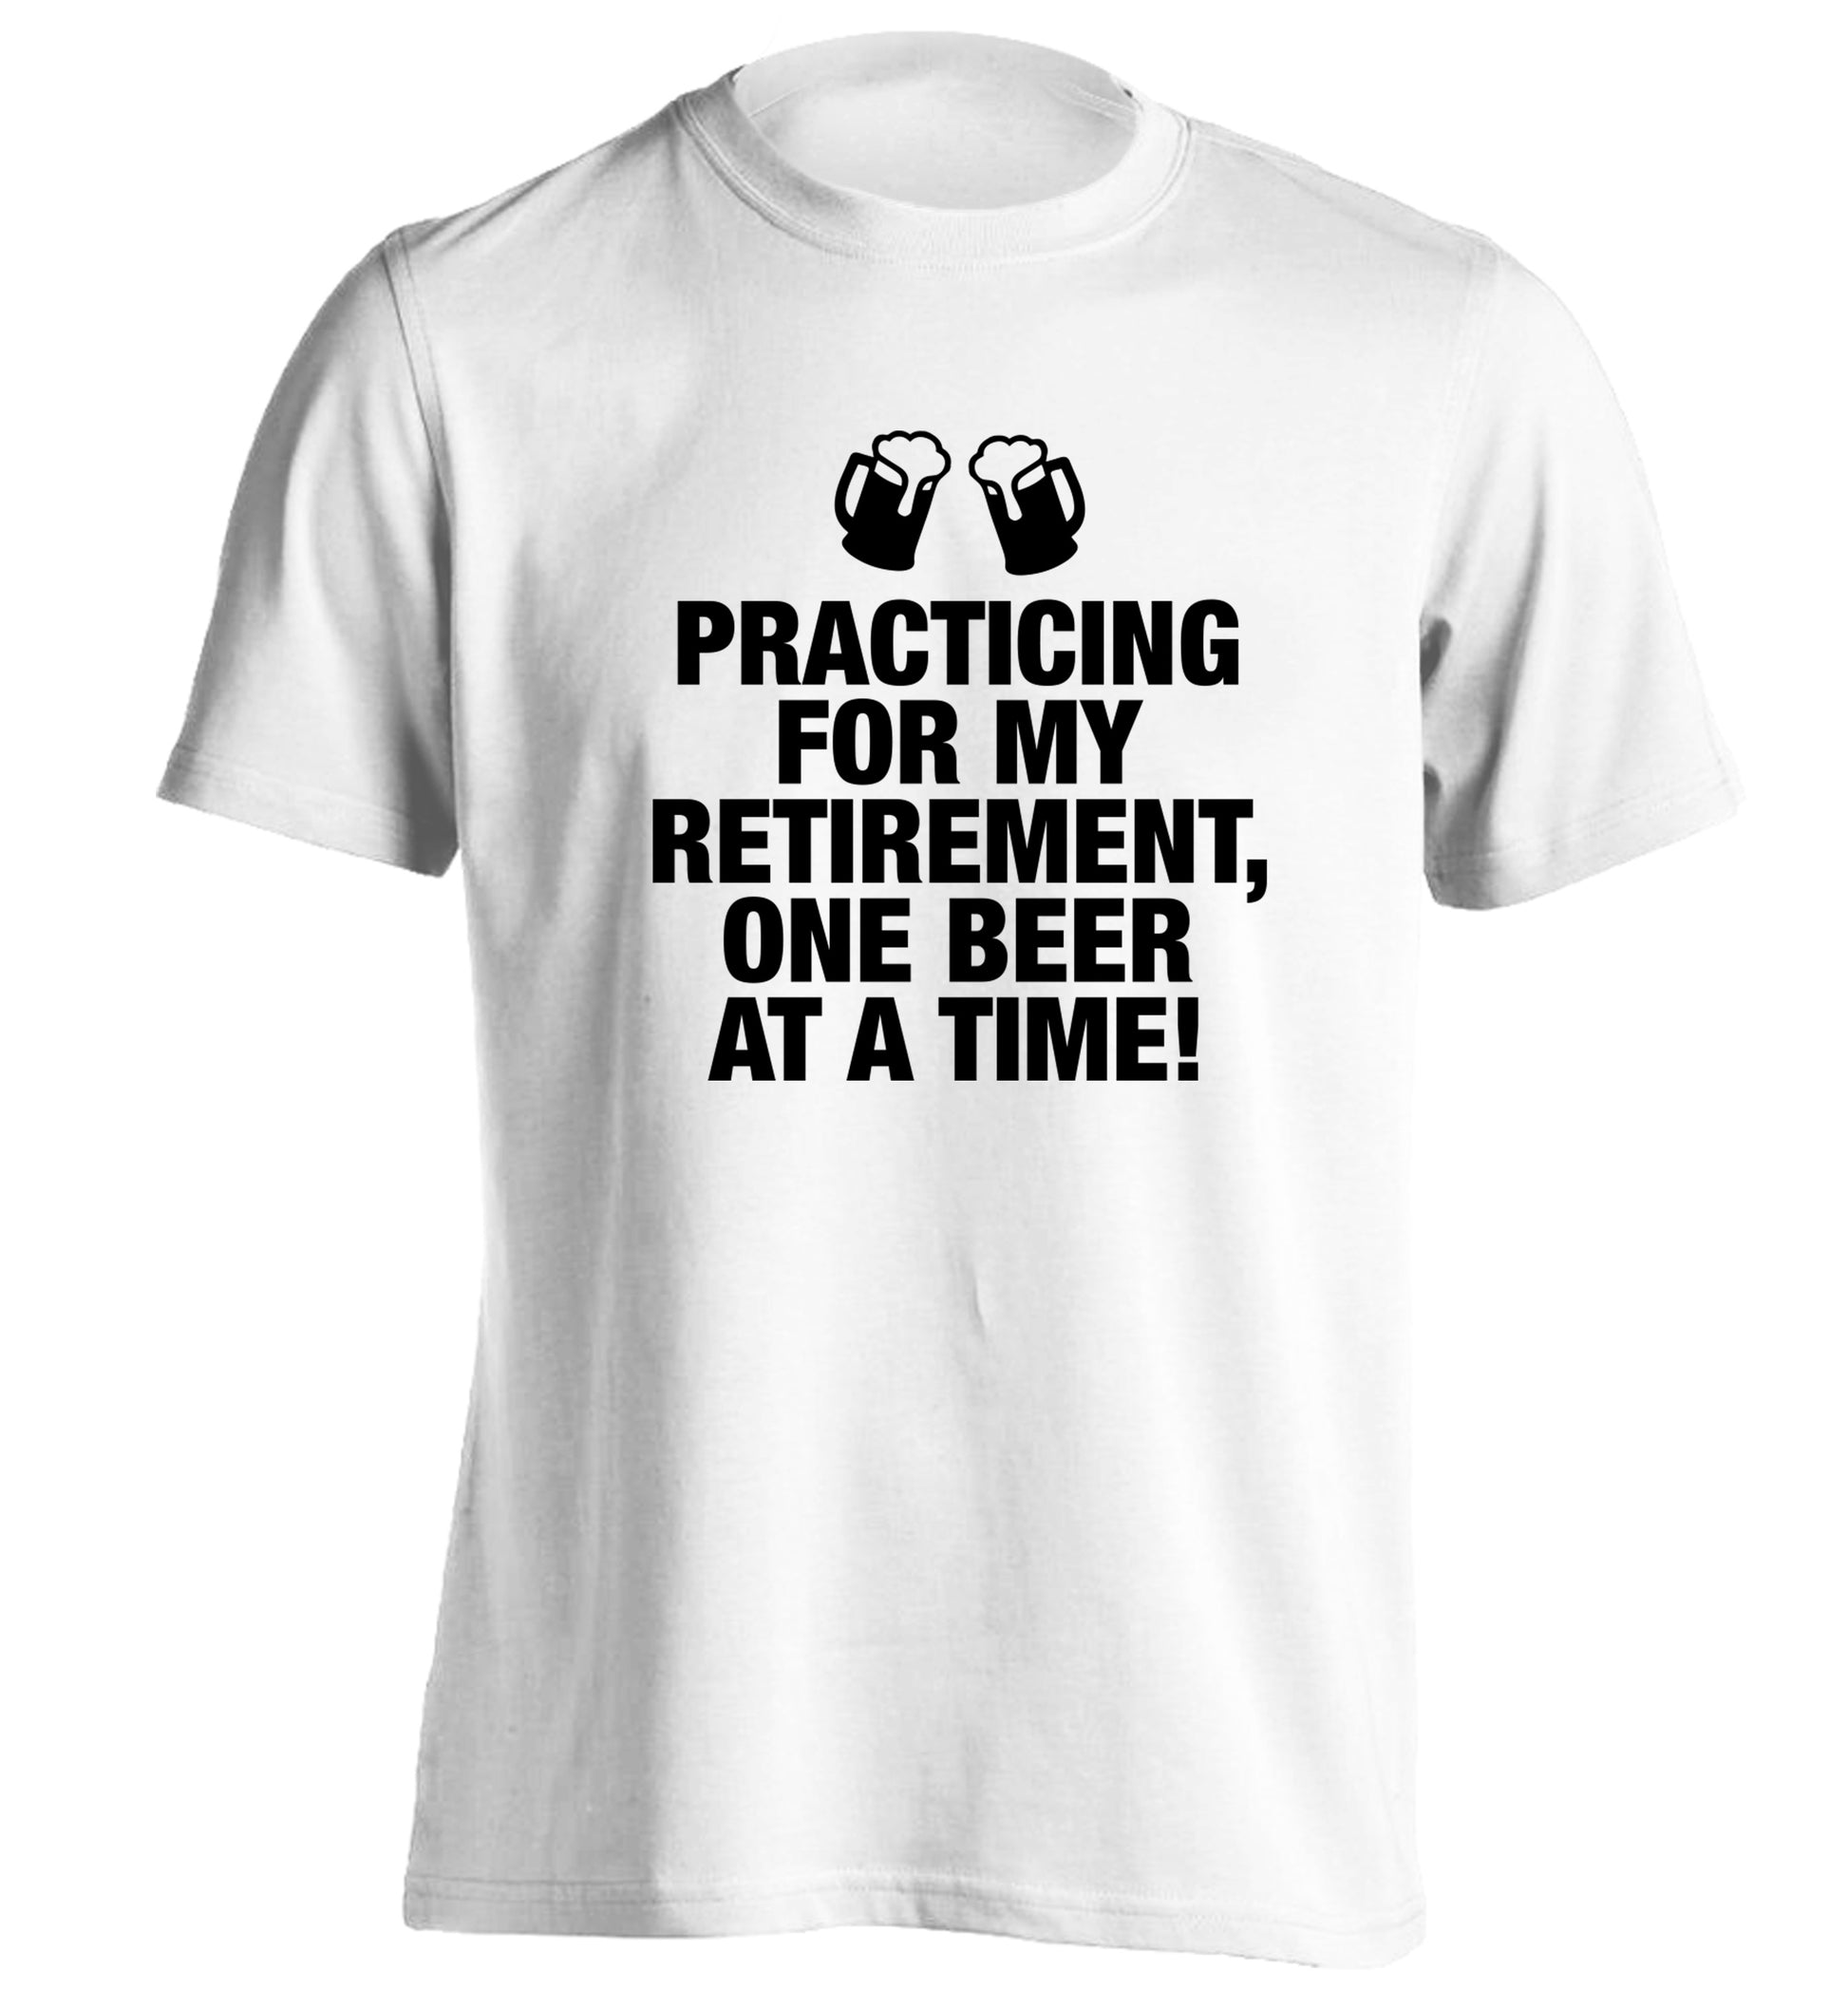 Practicing my retirement one beer at a time adults unisex white Tshirt 2XL